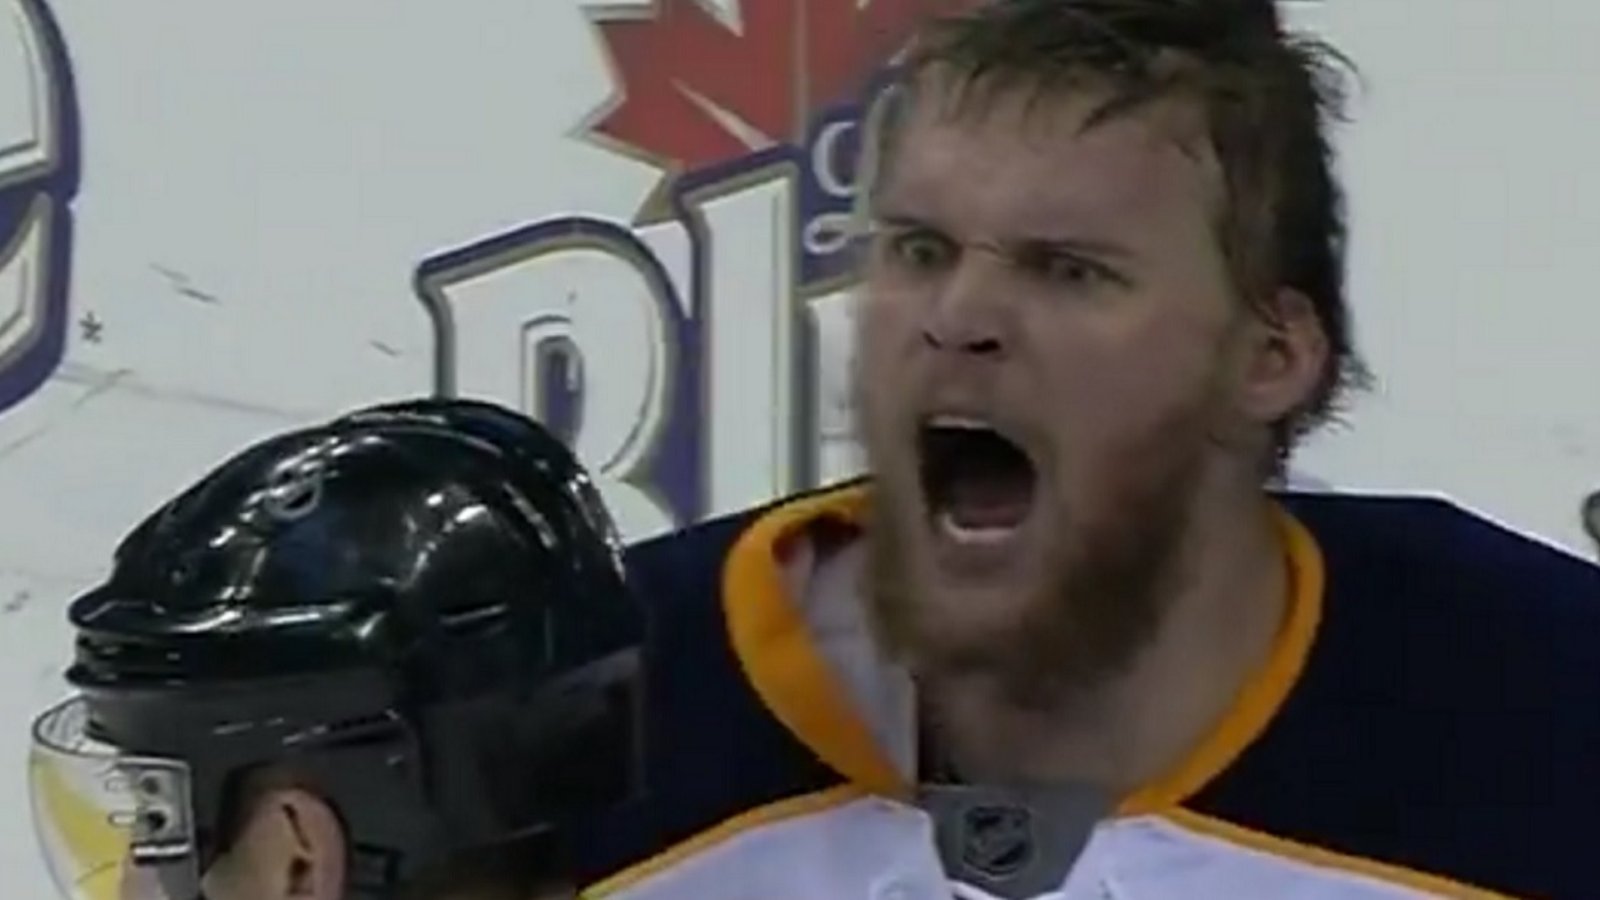 Watch Robin Lehner snap on his own team after getting pulled tonight!